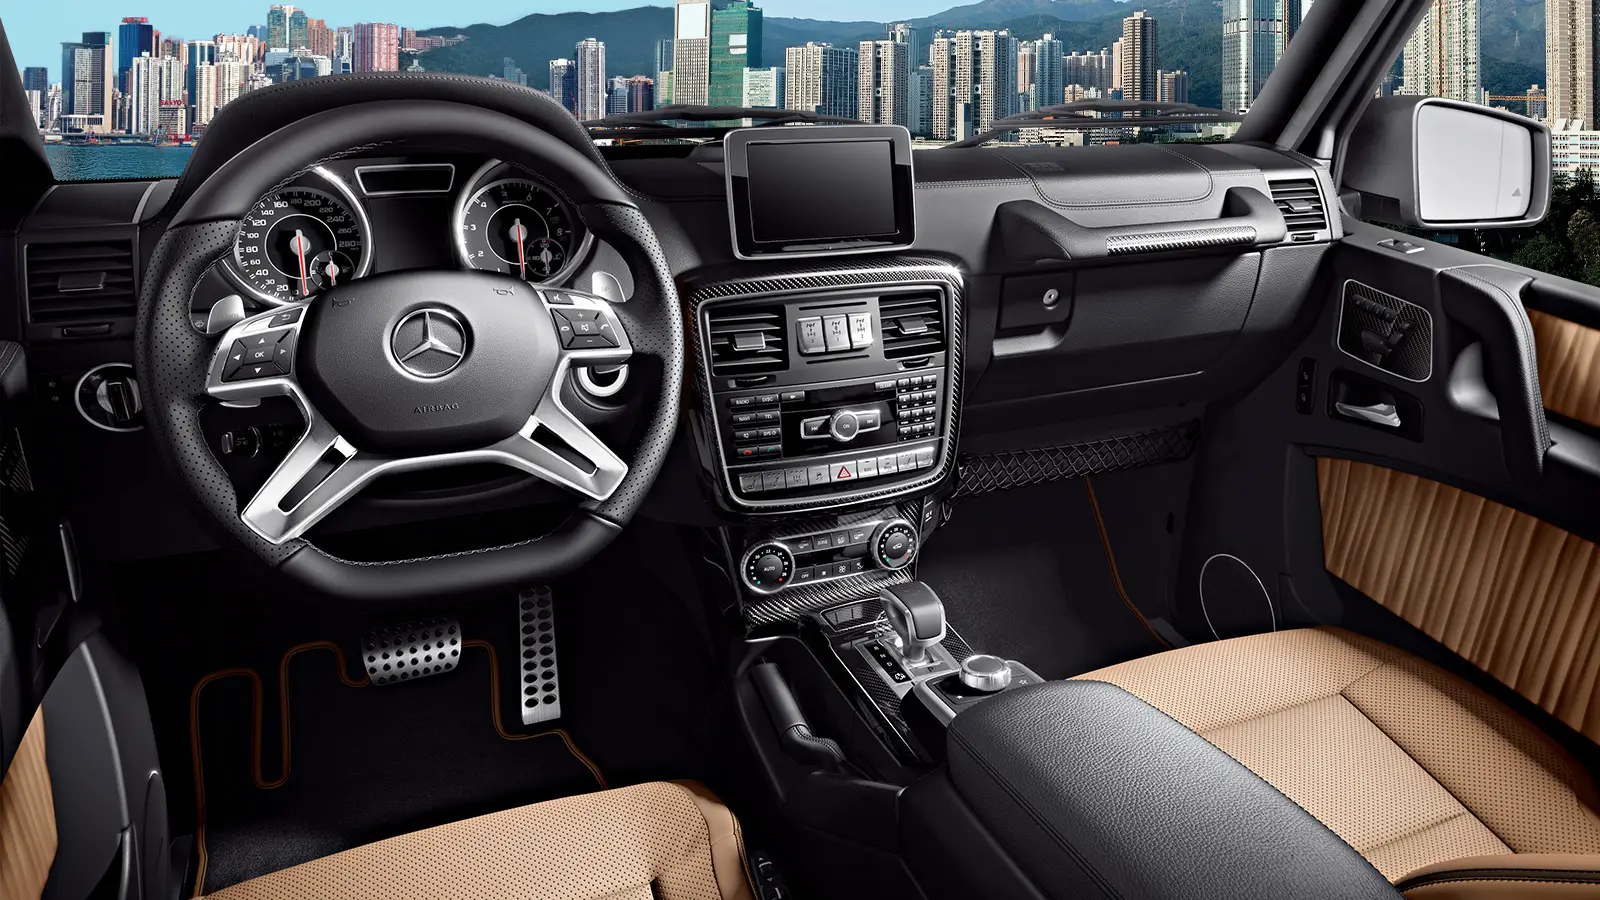 Mercedes Benz Amg G 63 Interior Image Gallery Pictures Photos